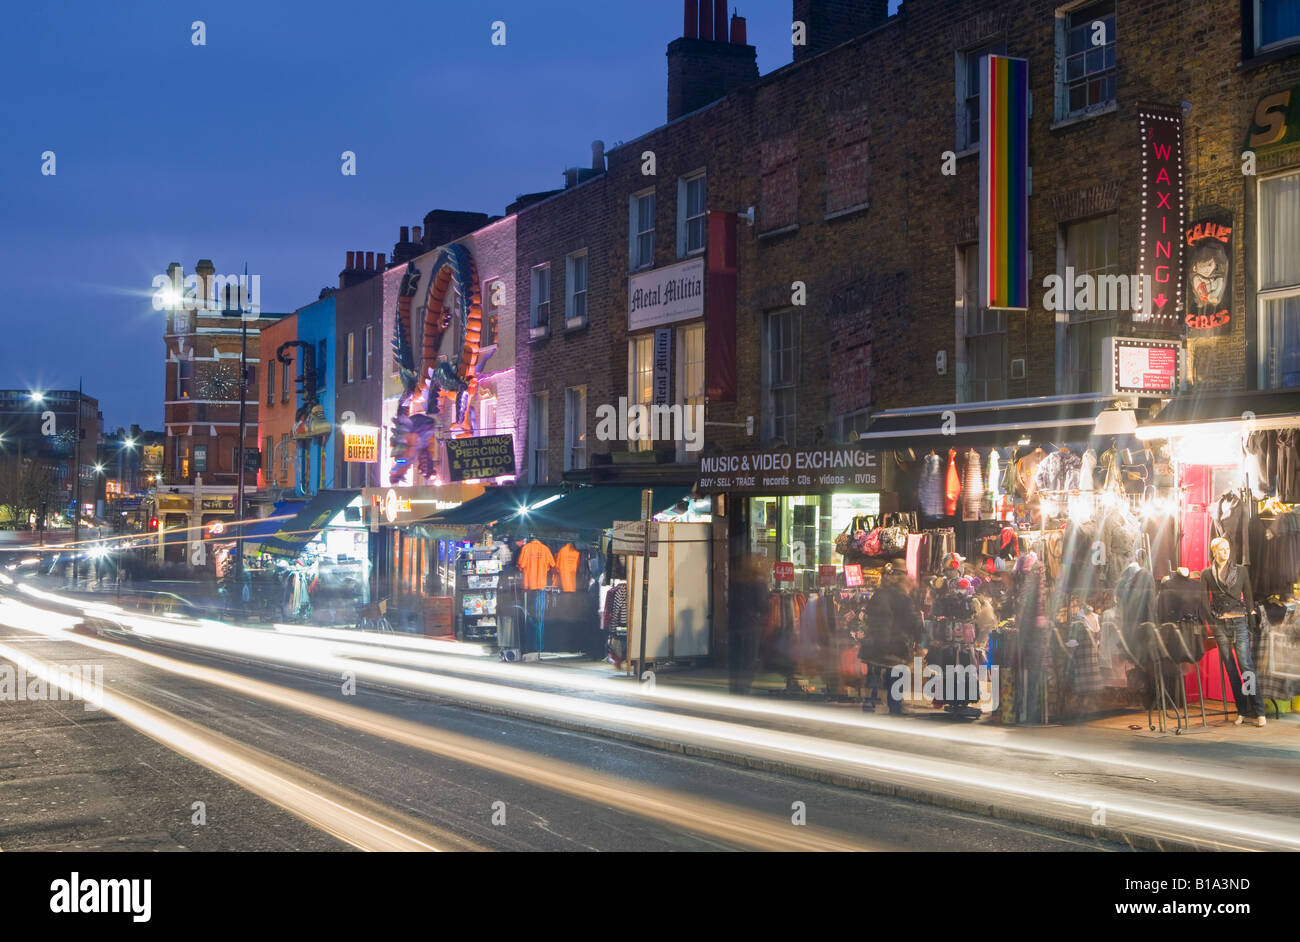 Shops and markets in Camden Town, London, England. Stock Photo